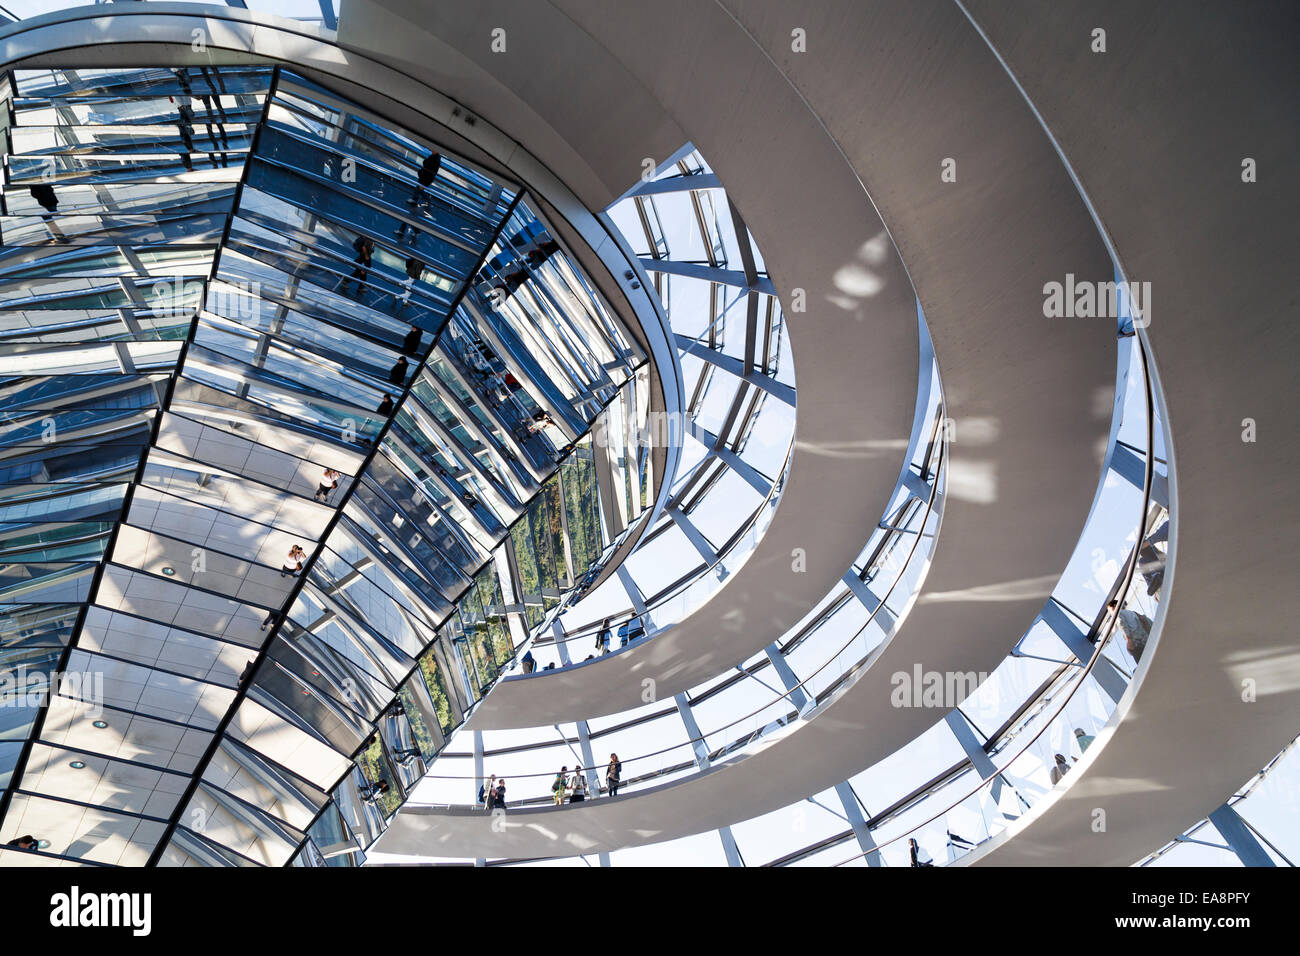 Inside Reichstag / Bundestag dome, Berlin, Germany Stock Photo